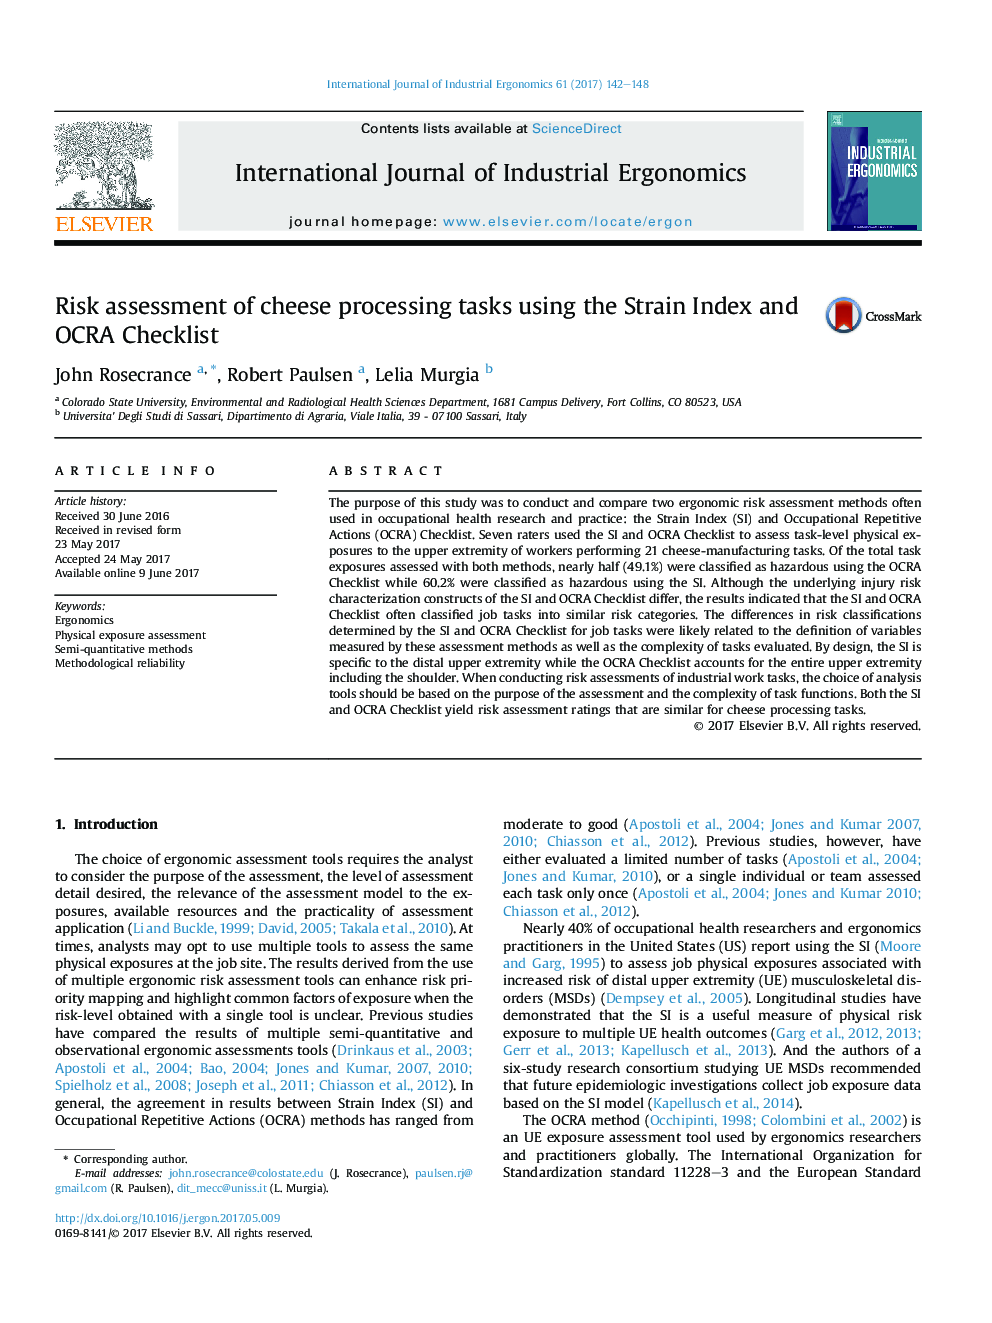 Risk assessment of cheese processing tasks using the Strain Index and OCRA Checklist